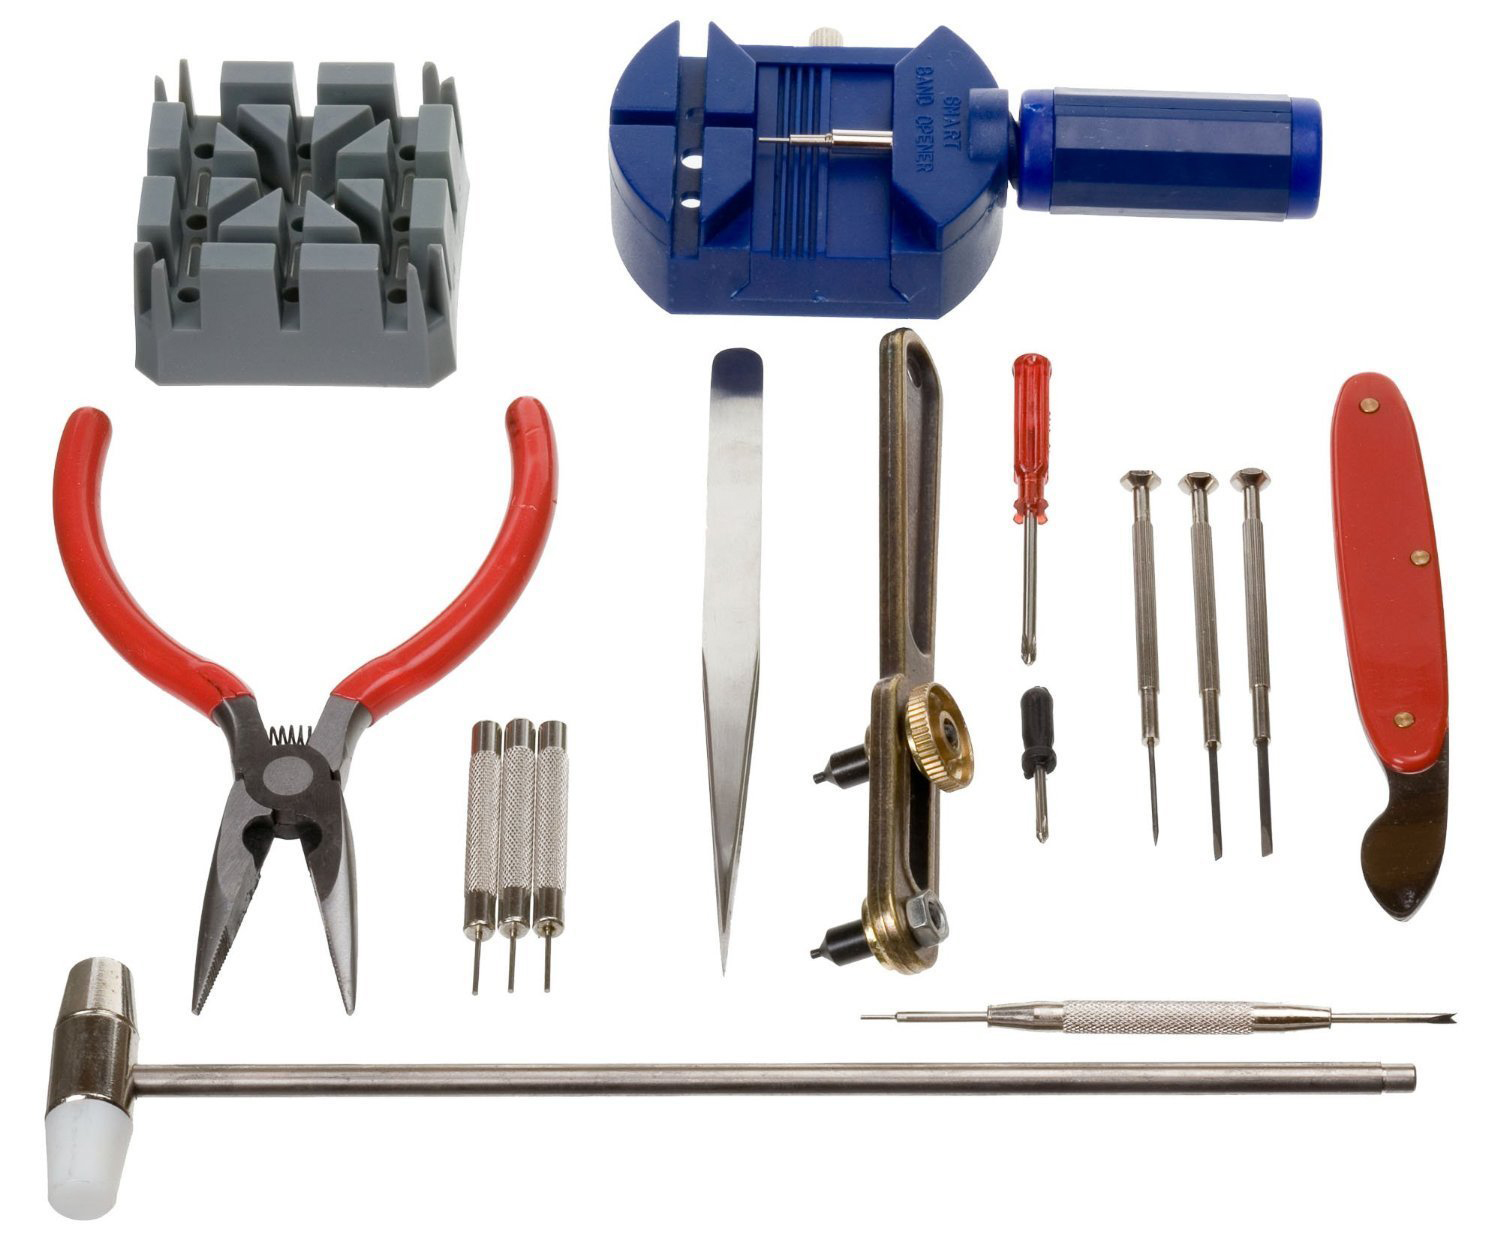 WATCH REPAIR KIT 16 PIECES - Click Image to Close